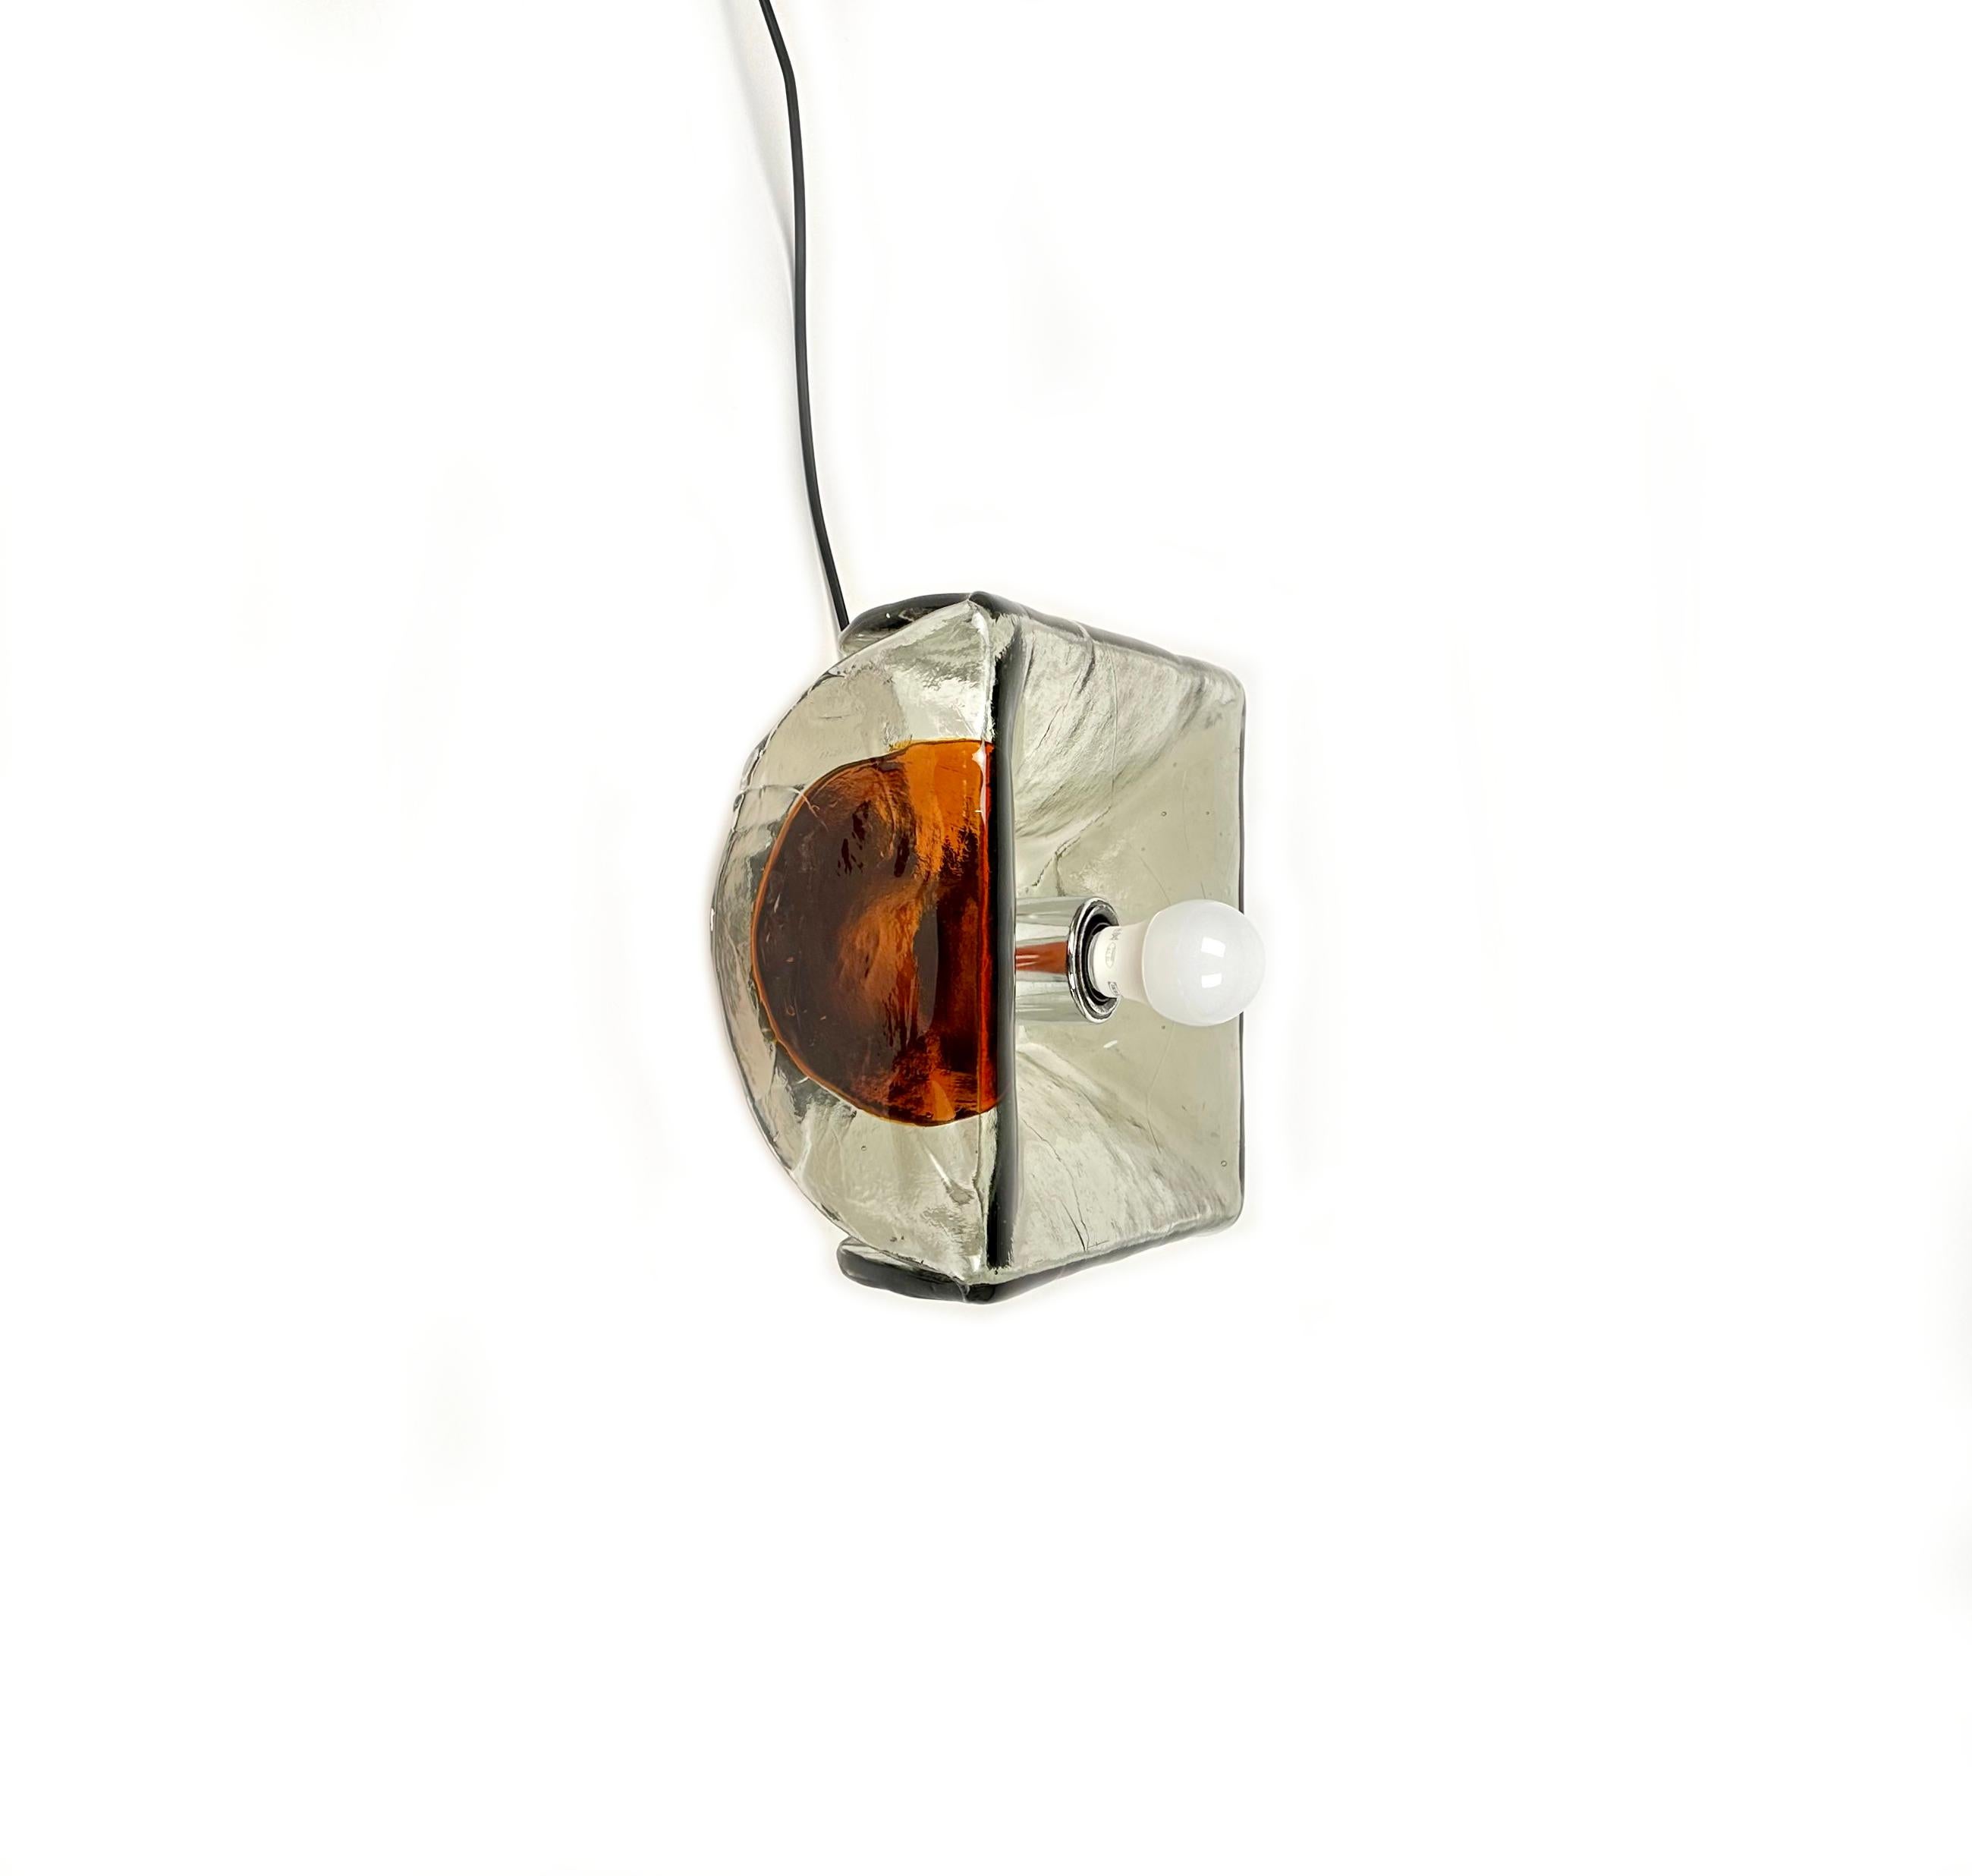 Midcentury squared wall lamp or celing lamp in thick murano glass and chrome by Carlo Nason for Mazzega.

Made in Italy in the 1970s.

Carlo Nason is a renowned Italian glassblower and designer, based in Murano, considered to be the world’s